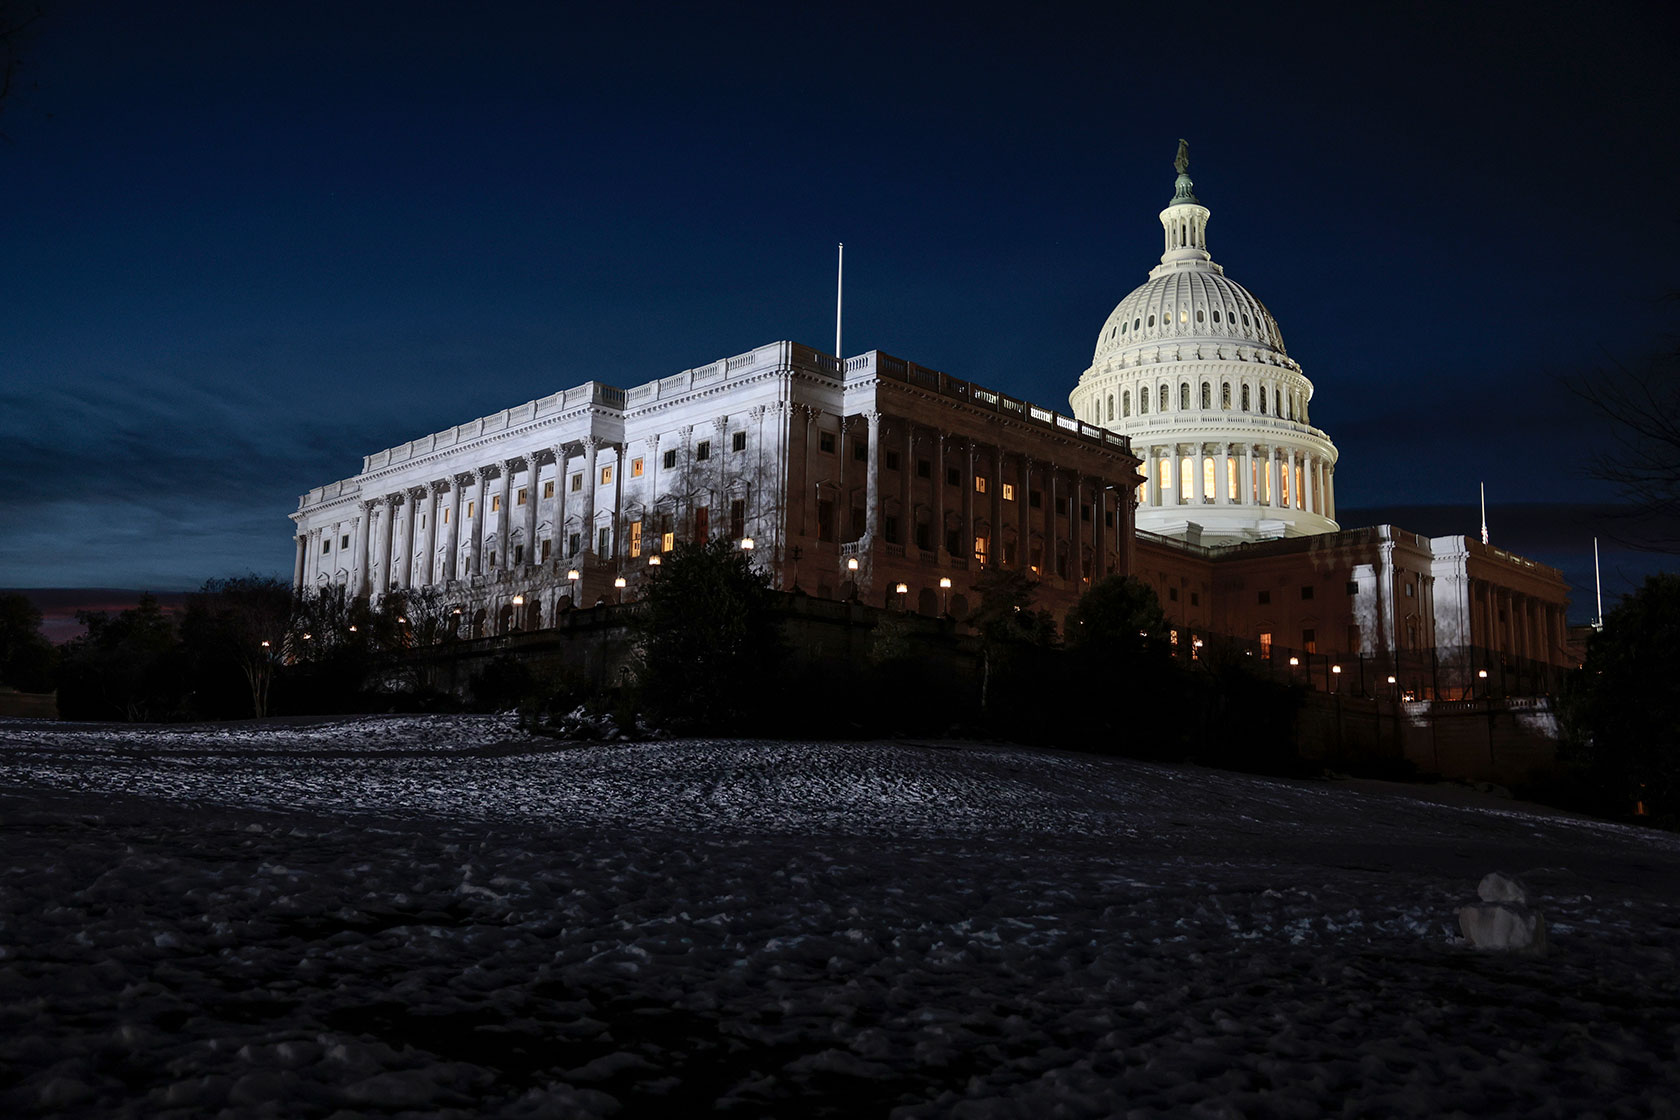 Photo shows the Capitol building glowing white against a dark blue sky, with snowy grounds in the foreground